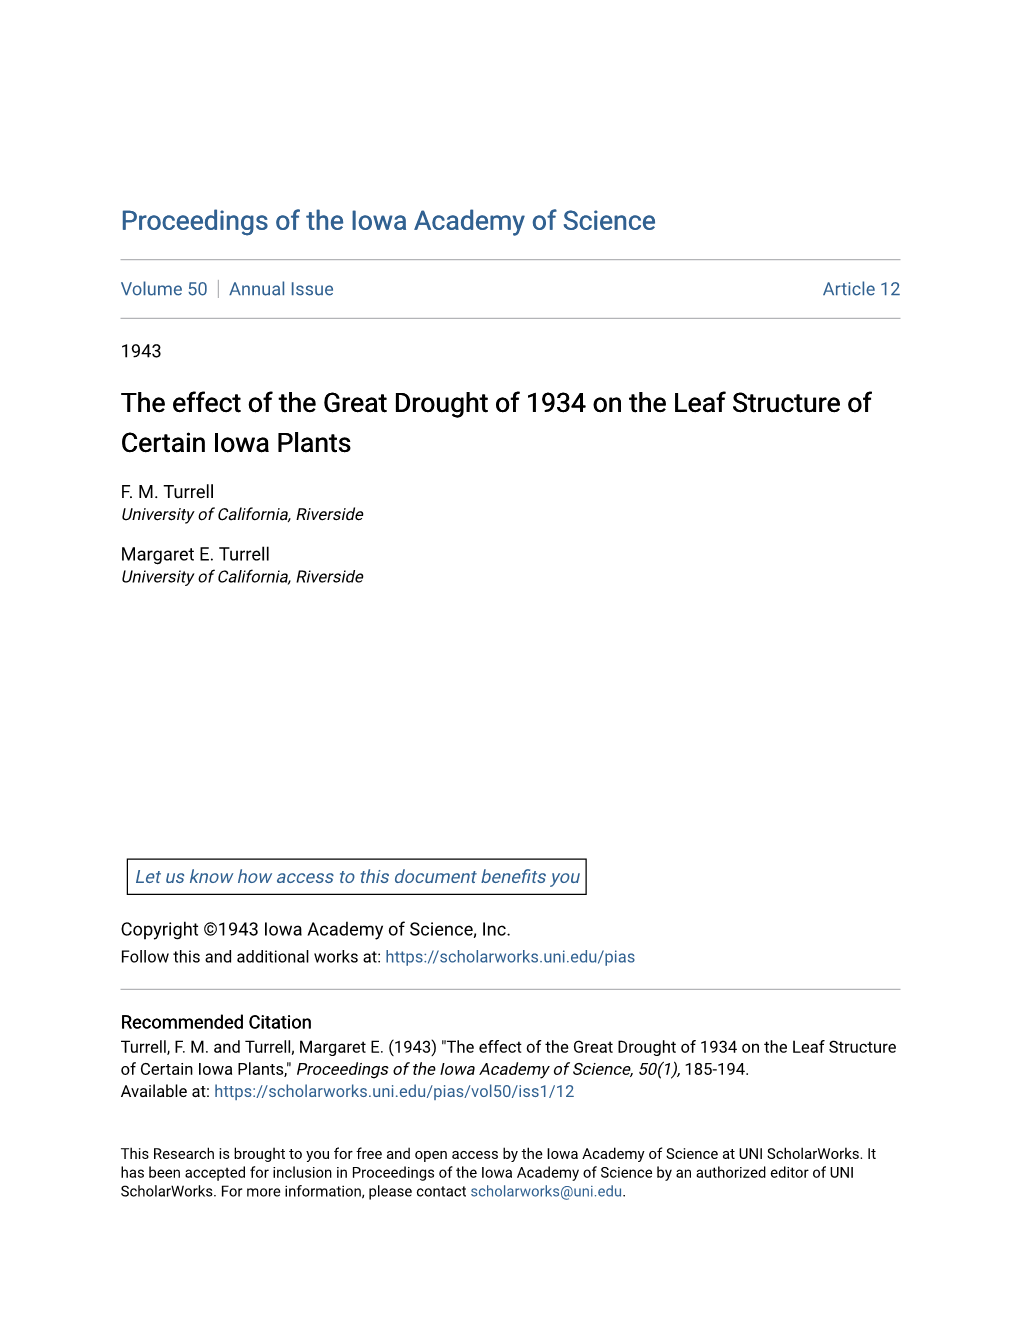 The Effect of the Great Drought of 1934 on the Leaf Structure of Certain Iowa Plants